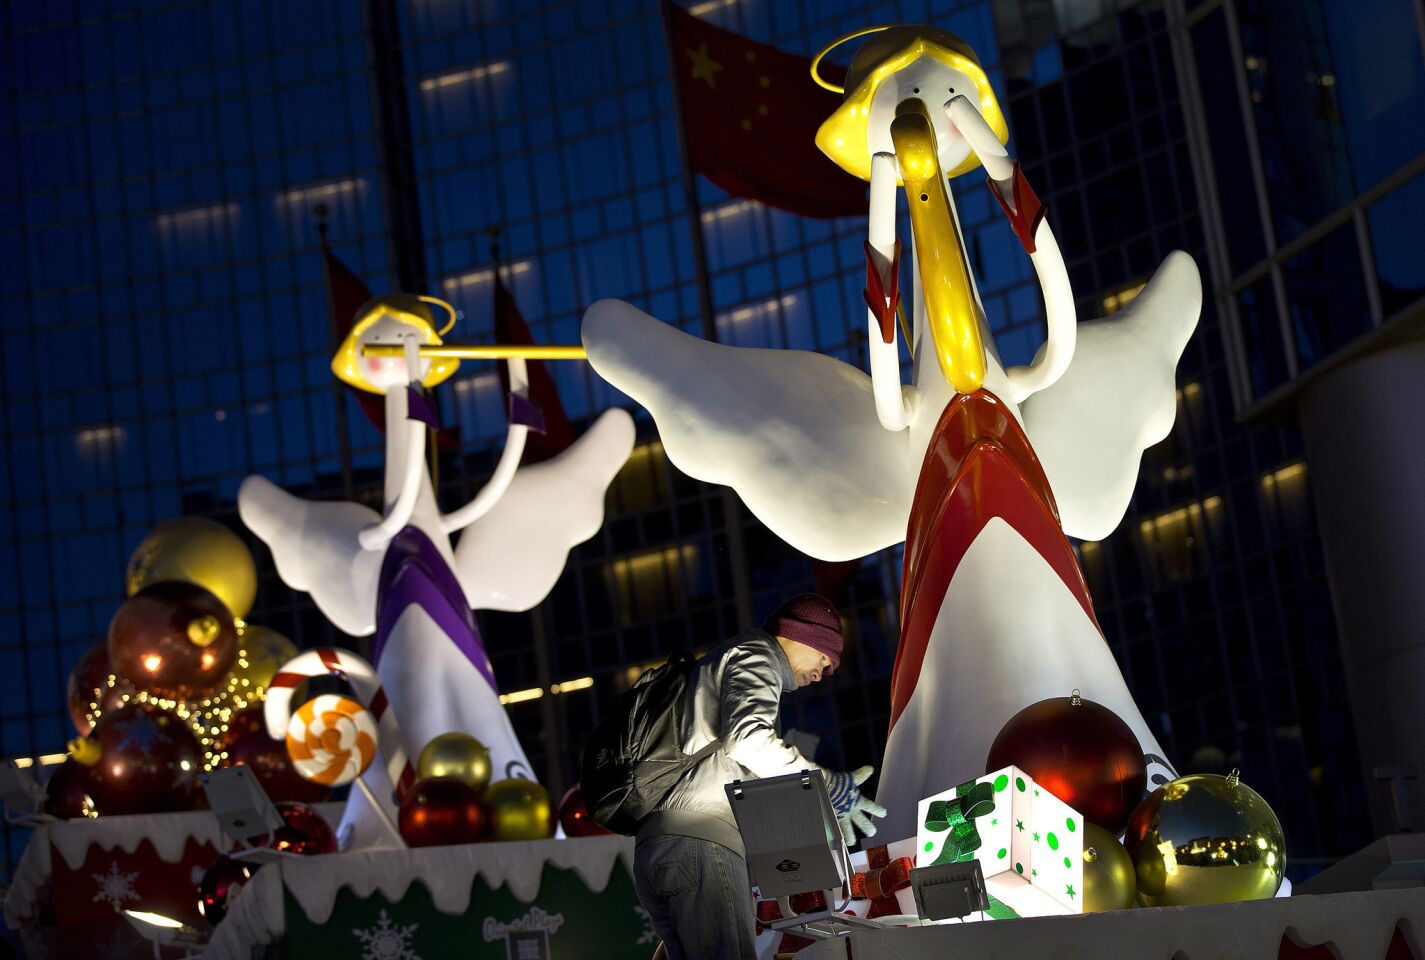 A worker tends to the winged angels Christmas display outside a shopping mall.